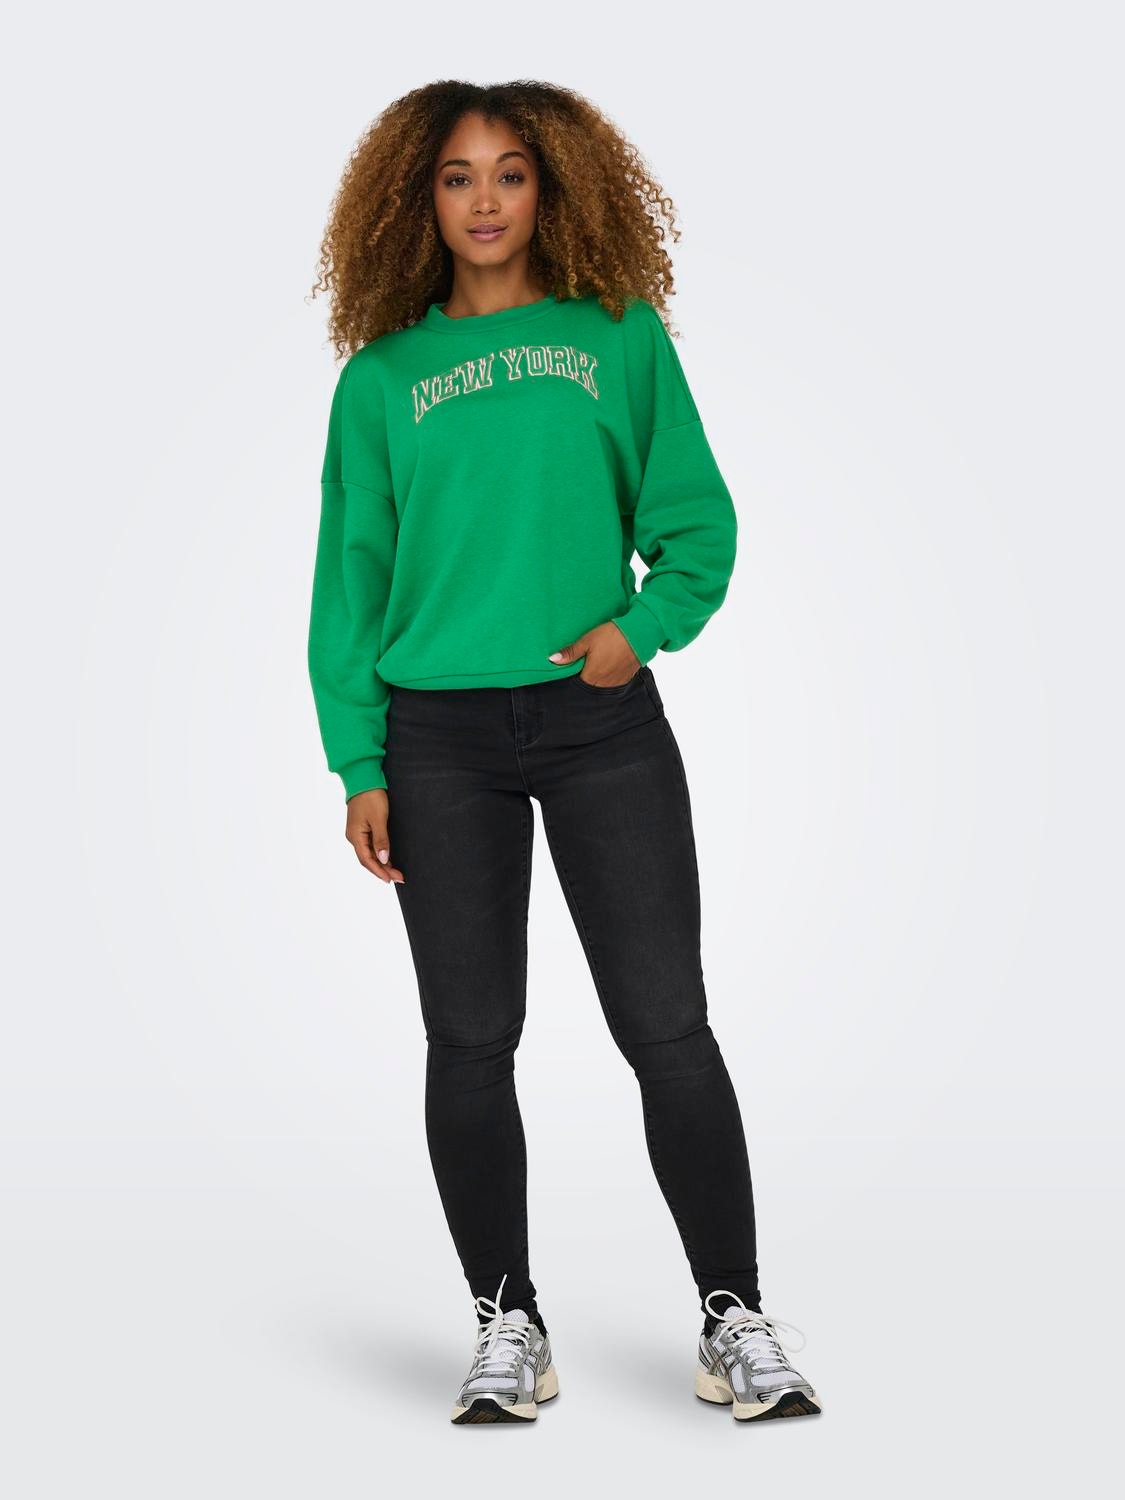 ONLY Regular Fit Round Neck Ribbed cuffs Dropped shoulders Sweatshirt -Deep Mint - 15325354